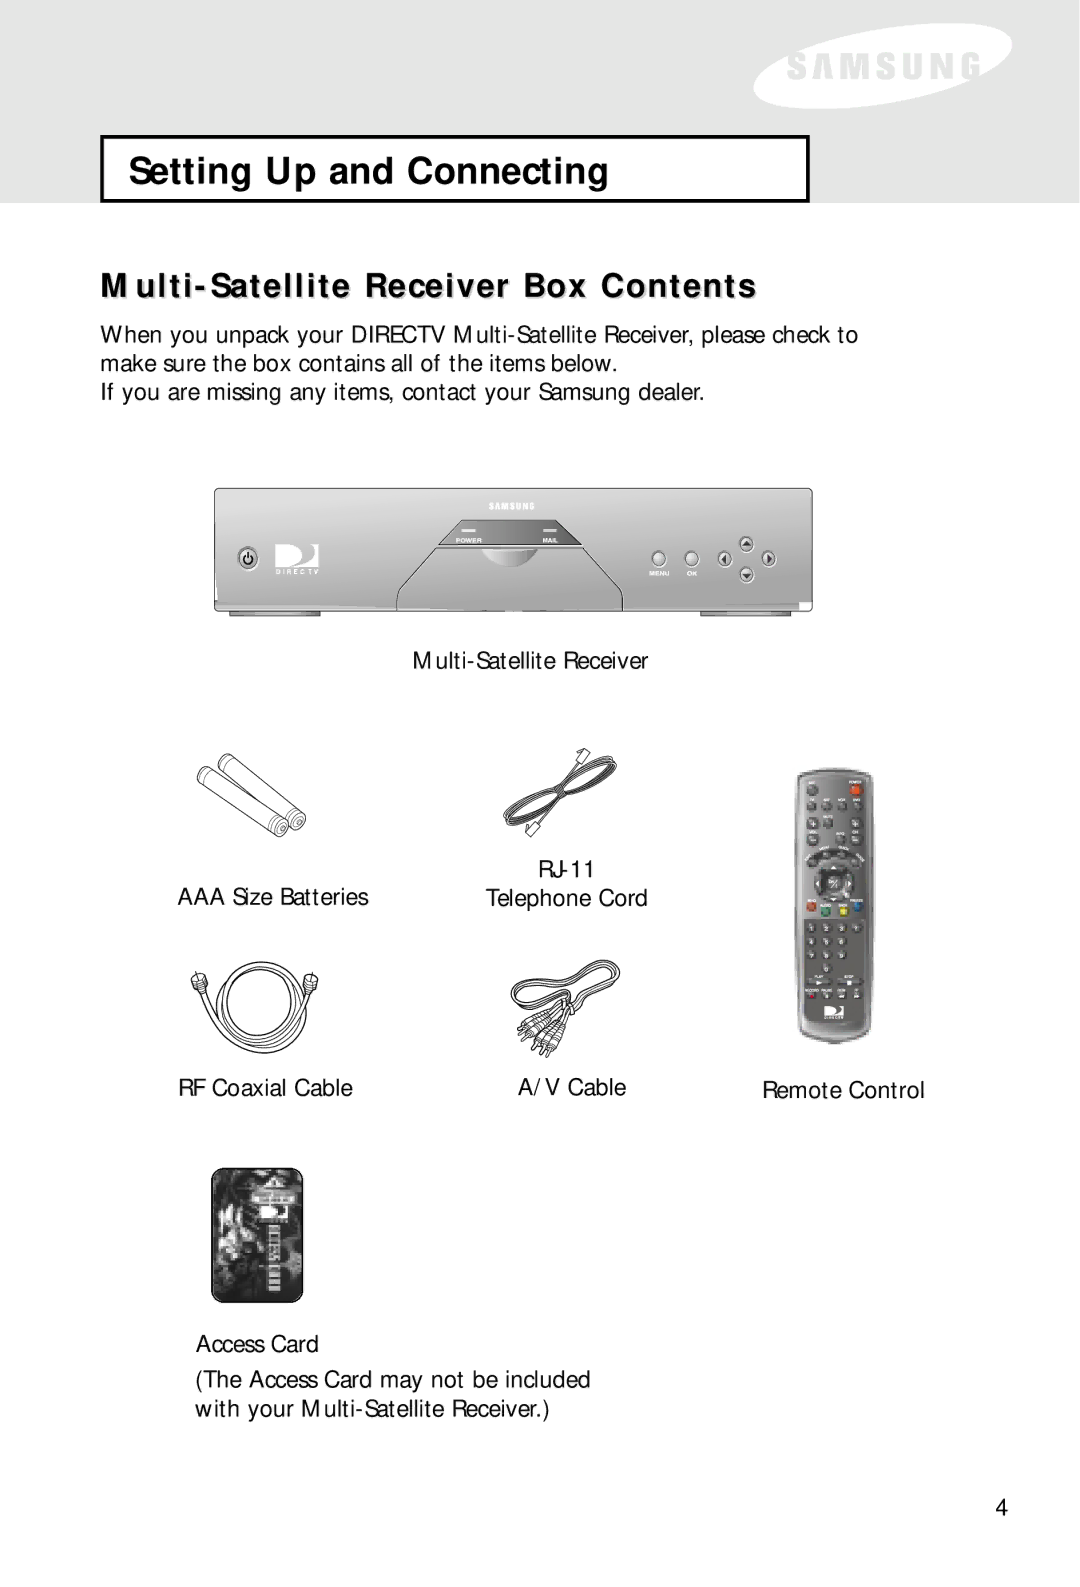 Samsung SIR-S60W owner manual Multi-Satellite Receiver Box Contents 